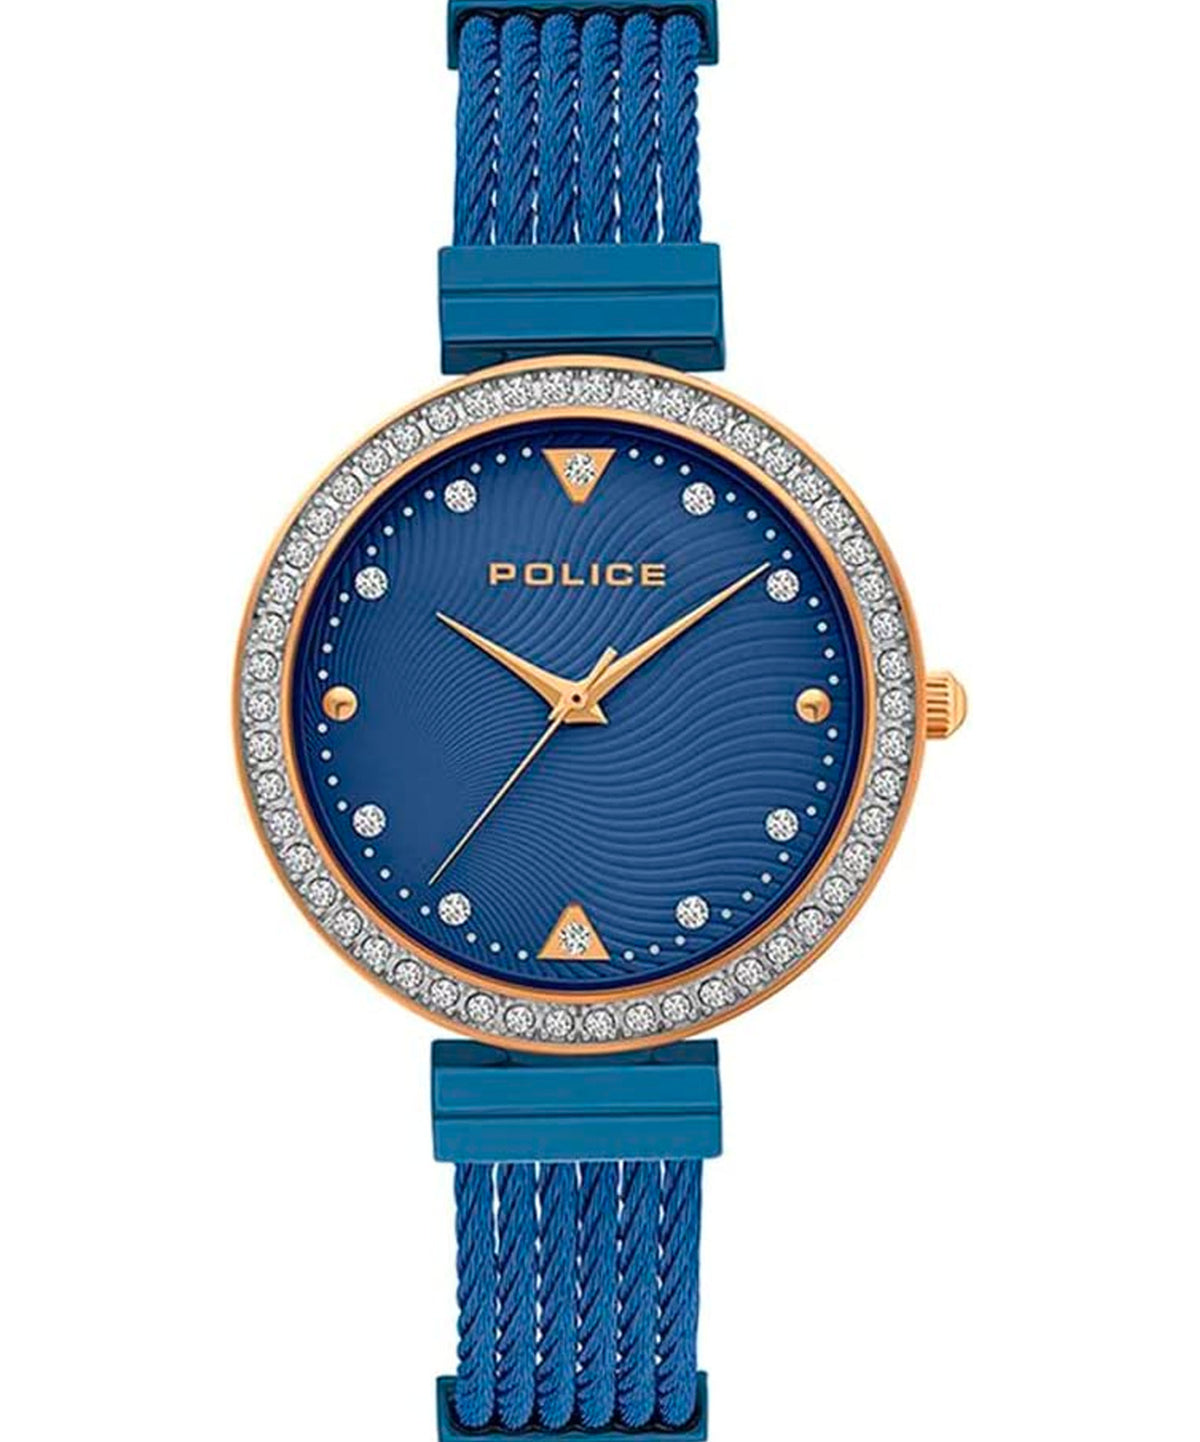 Police Women's Watch Analog, Yakima Blue Dial Blue Stainless Band, P15575BSTR-0